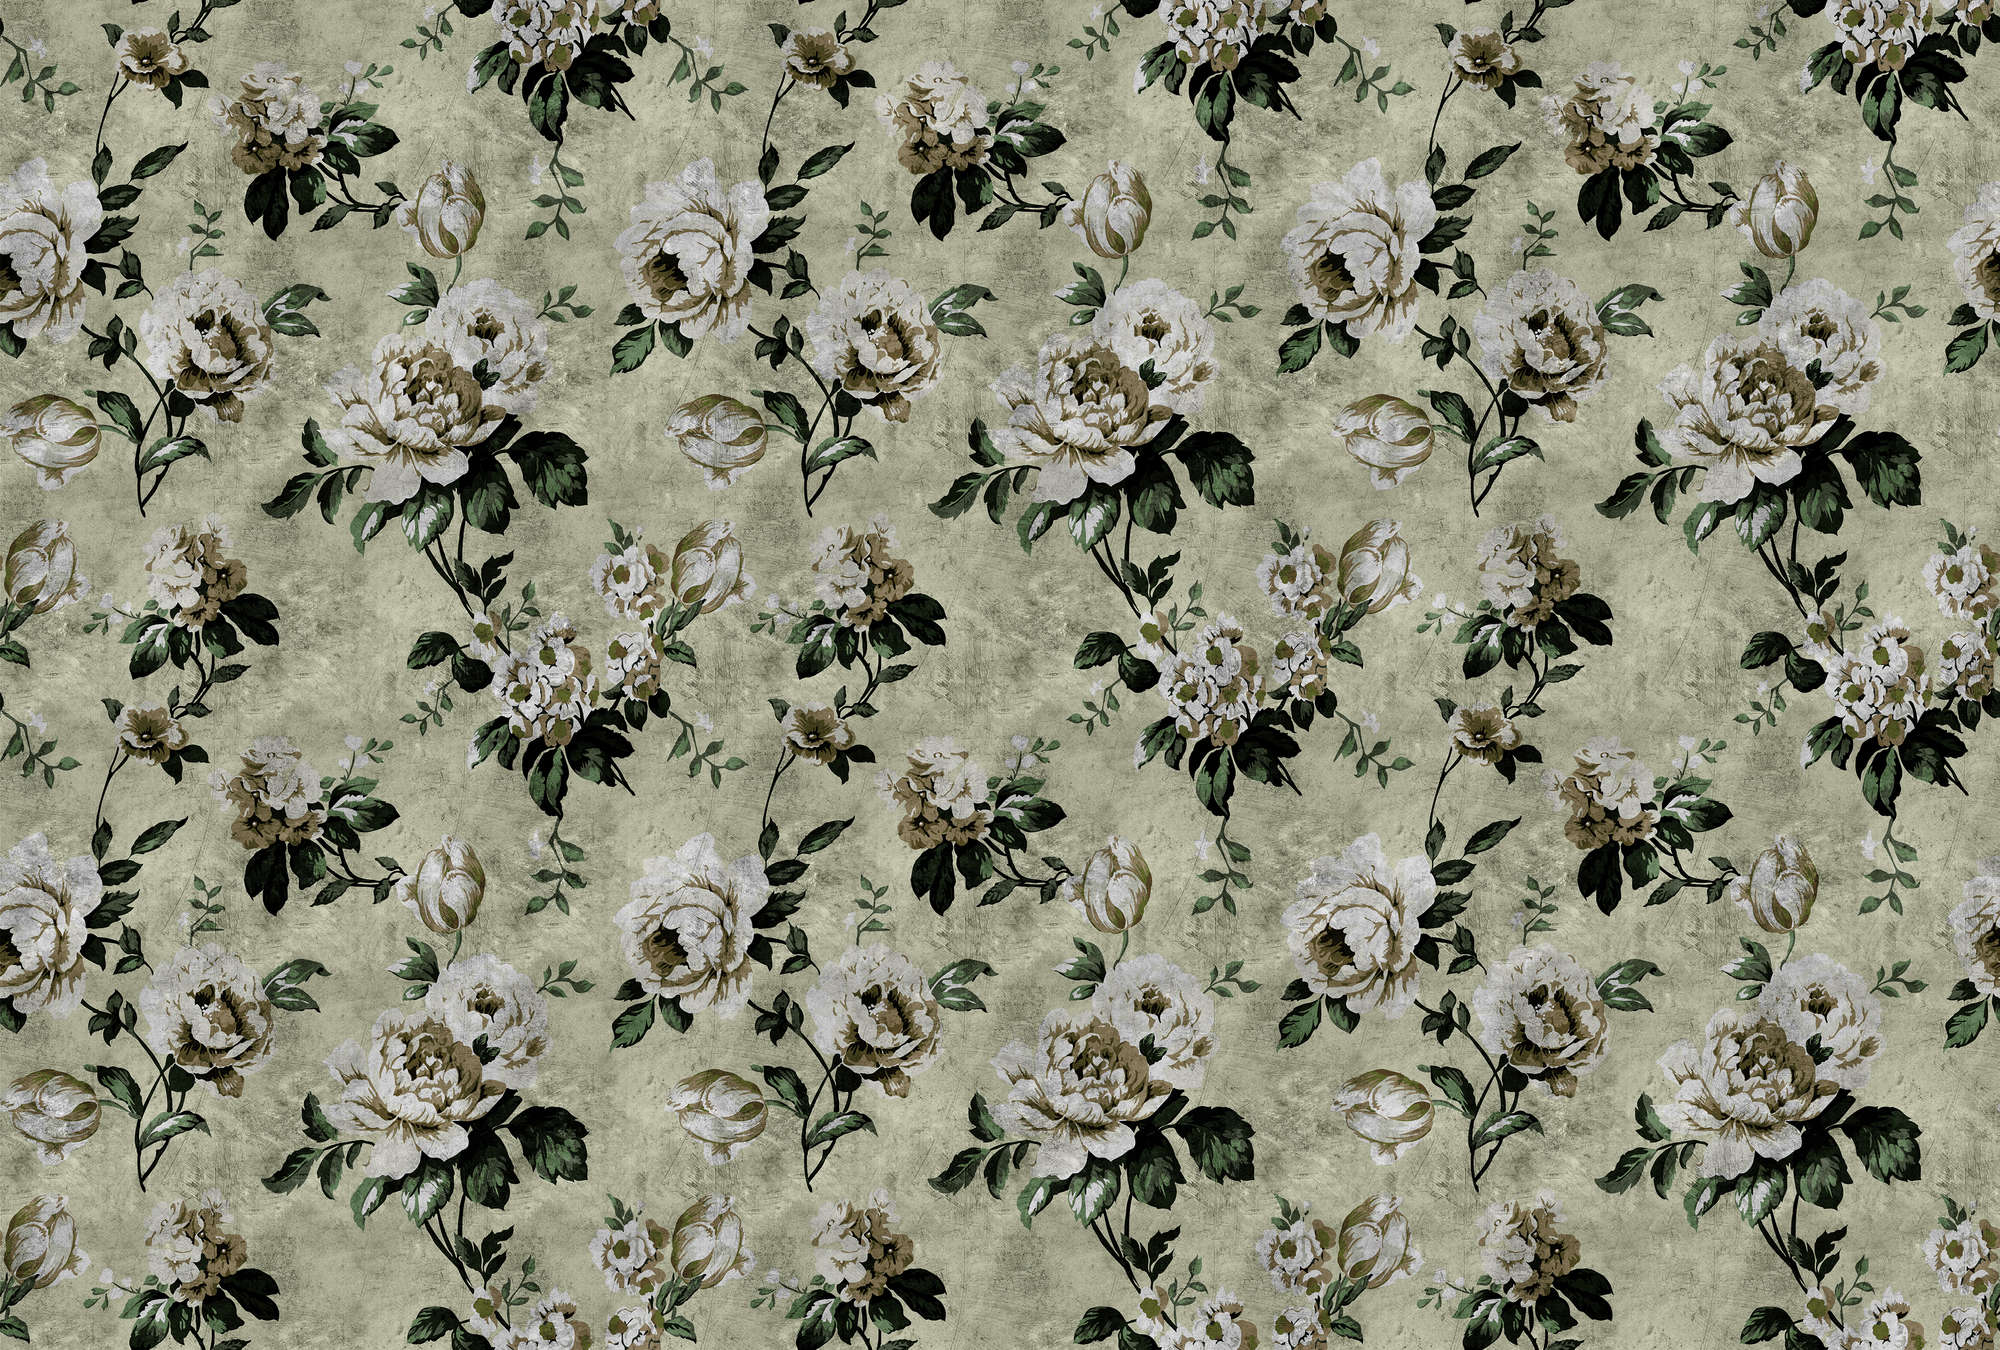             Wild roses 1 - Roses wallpaper in retro look, green- scratch structure - blue, green | pearl smooth fleece
        